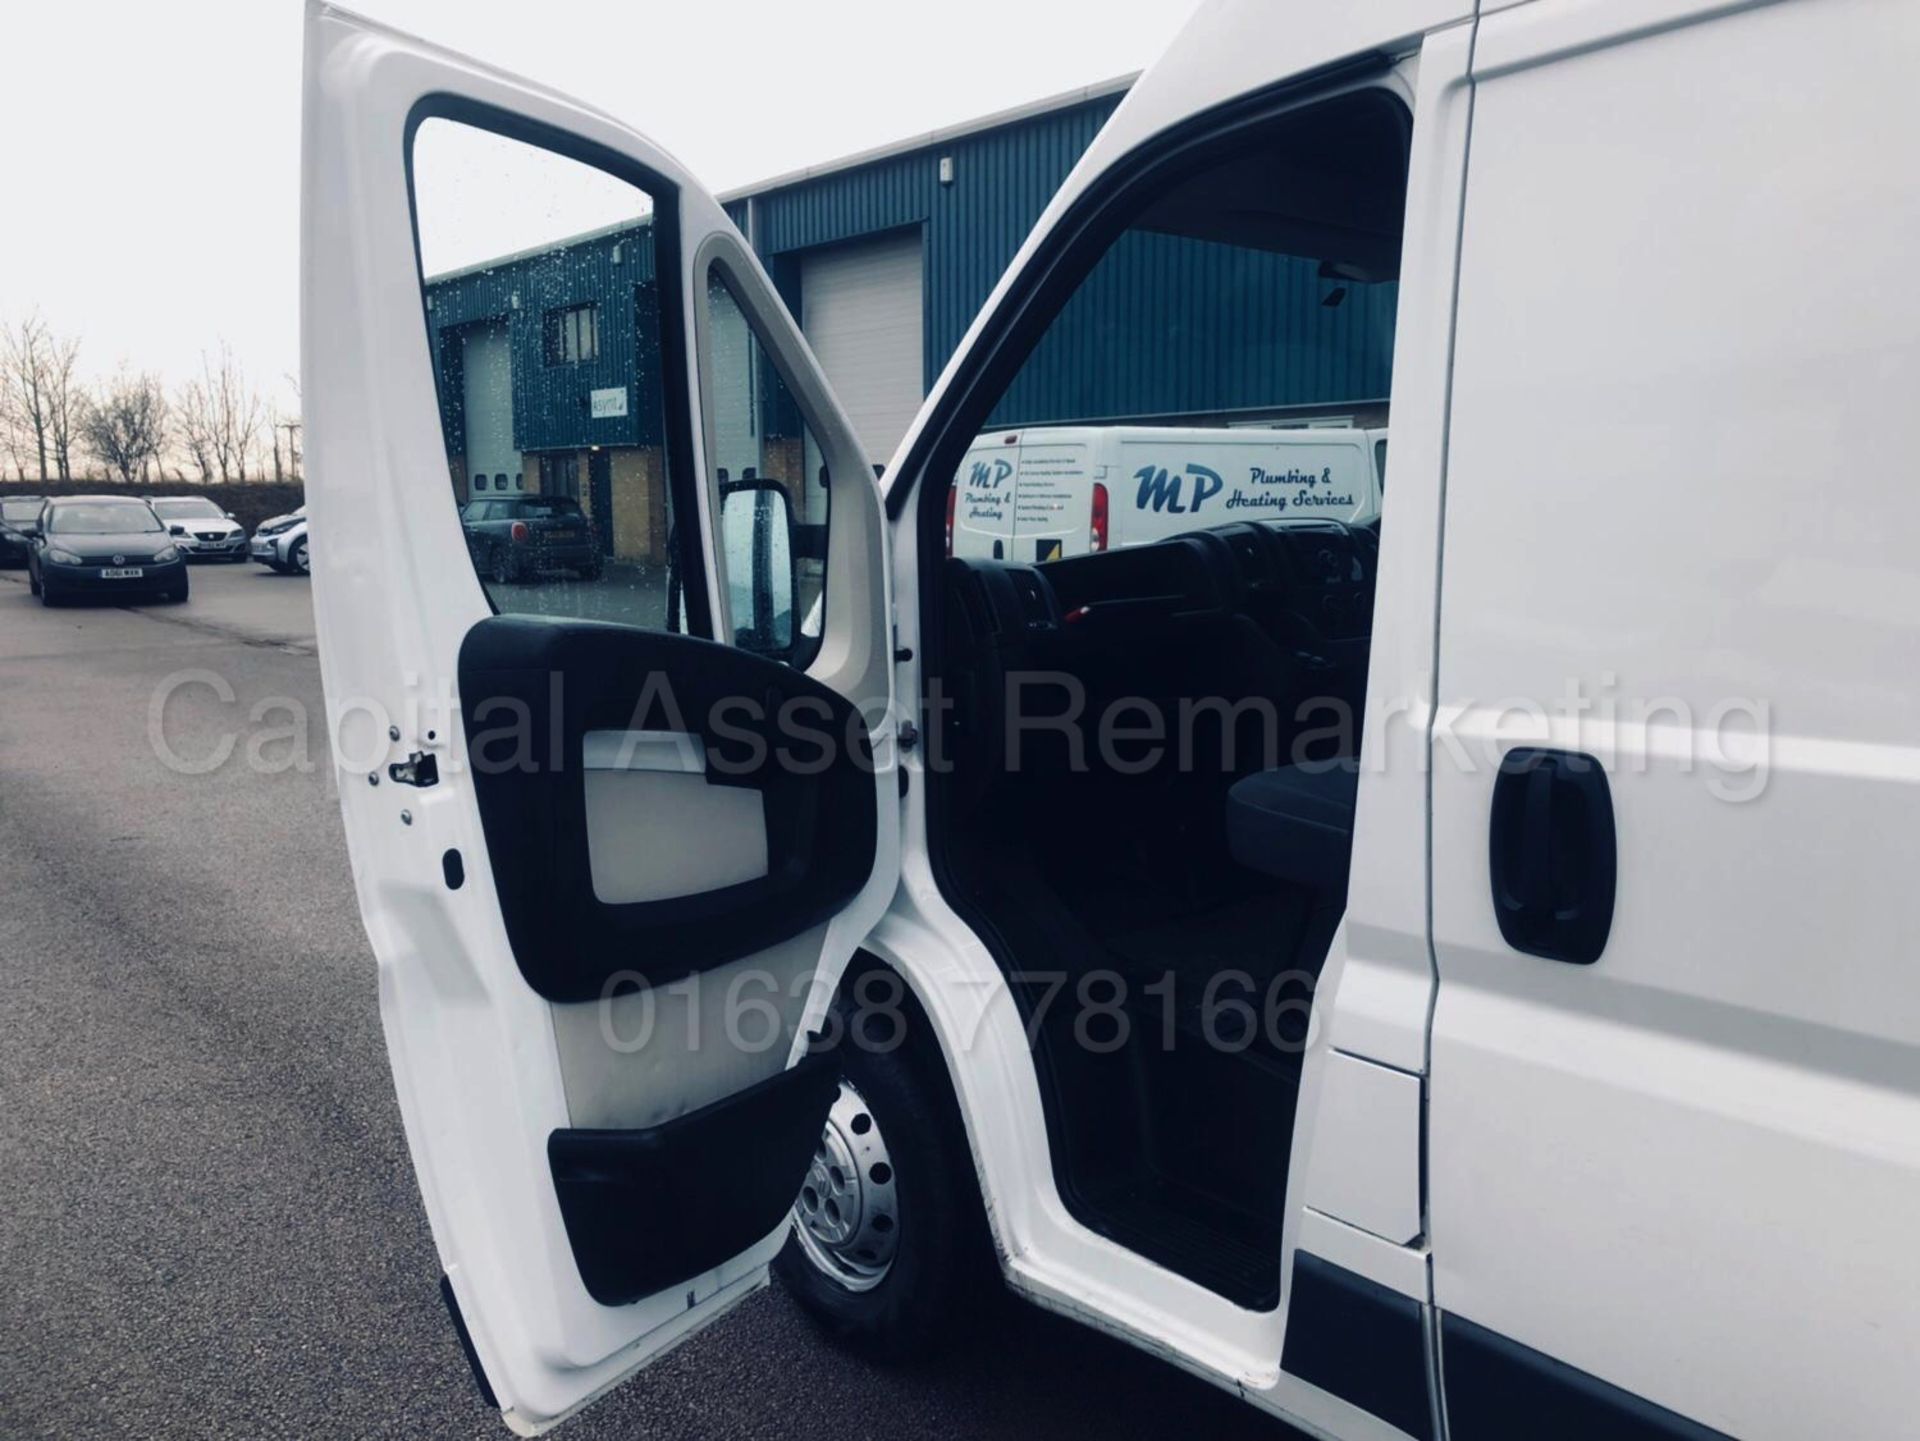 CITREON RELAY 35 'LWB HI-ROOF' (2012 - 12 REG) '2.2 HDI - 130 BHP - 6 SPEED' **ELECTRIC PACK** - Image 7 of 20